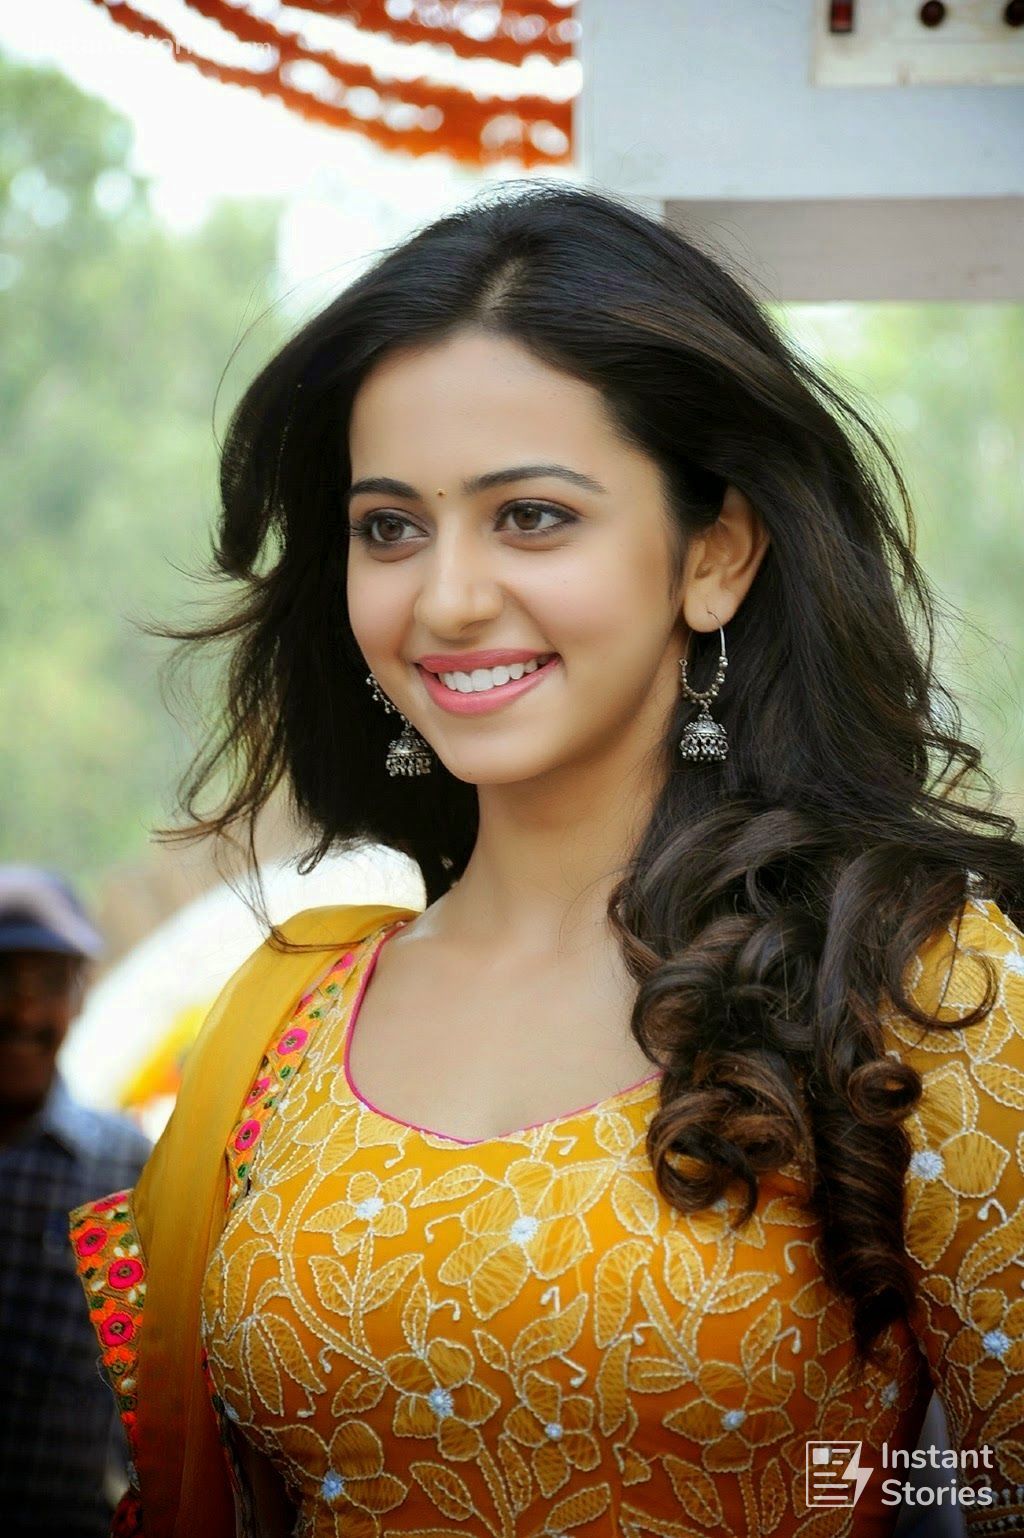 Best Collection of 999+ High Definition Images of Rakul Preet Singh in 4K